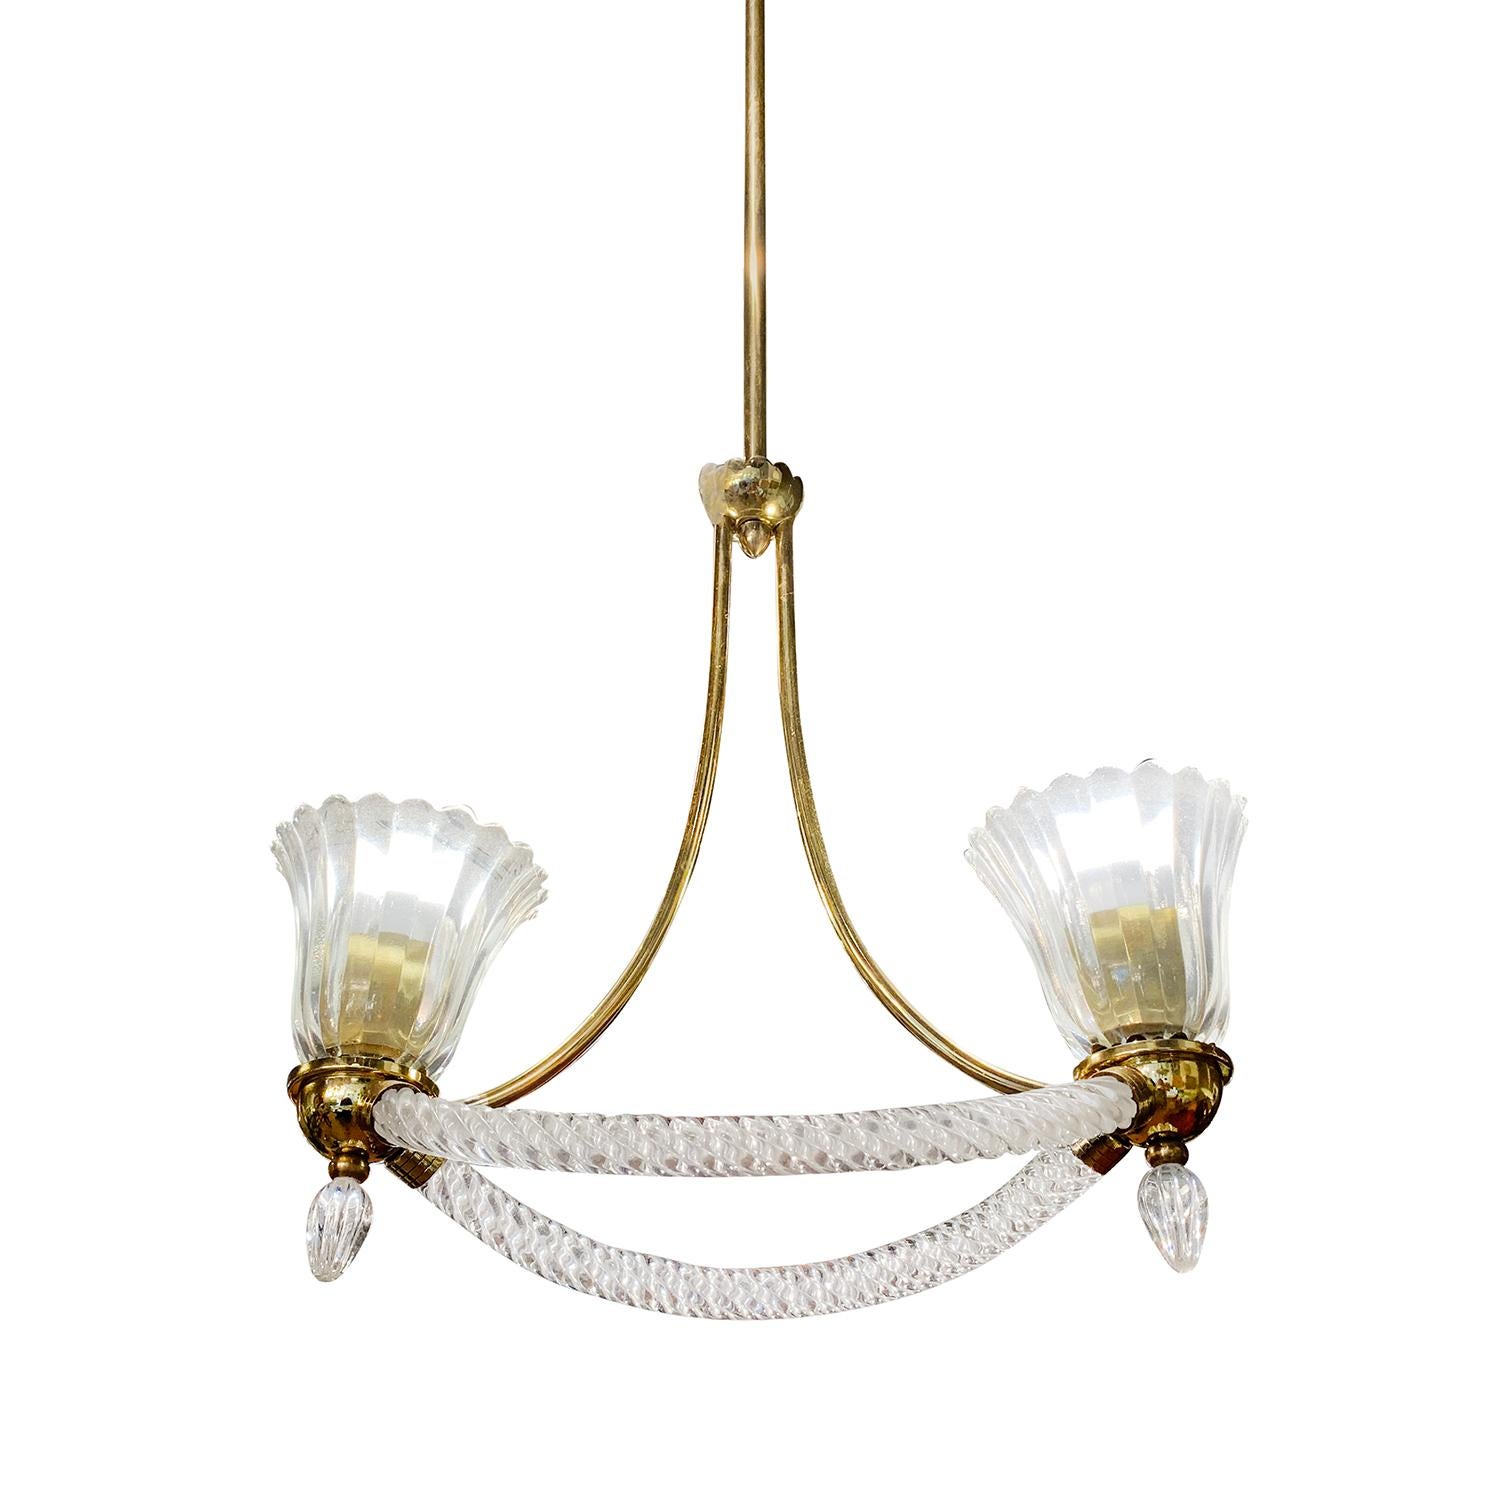 Hand-Crafted 20th Century Italian Murano Glass Chandelier, Brass Pendant by Barovier & Toso For Sale